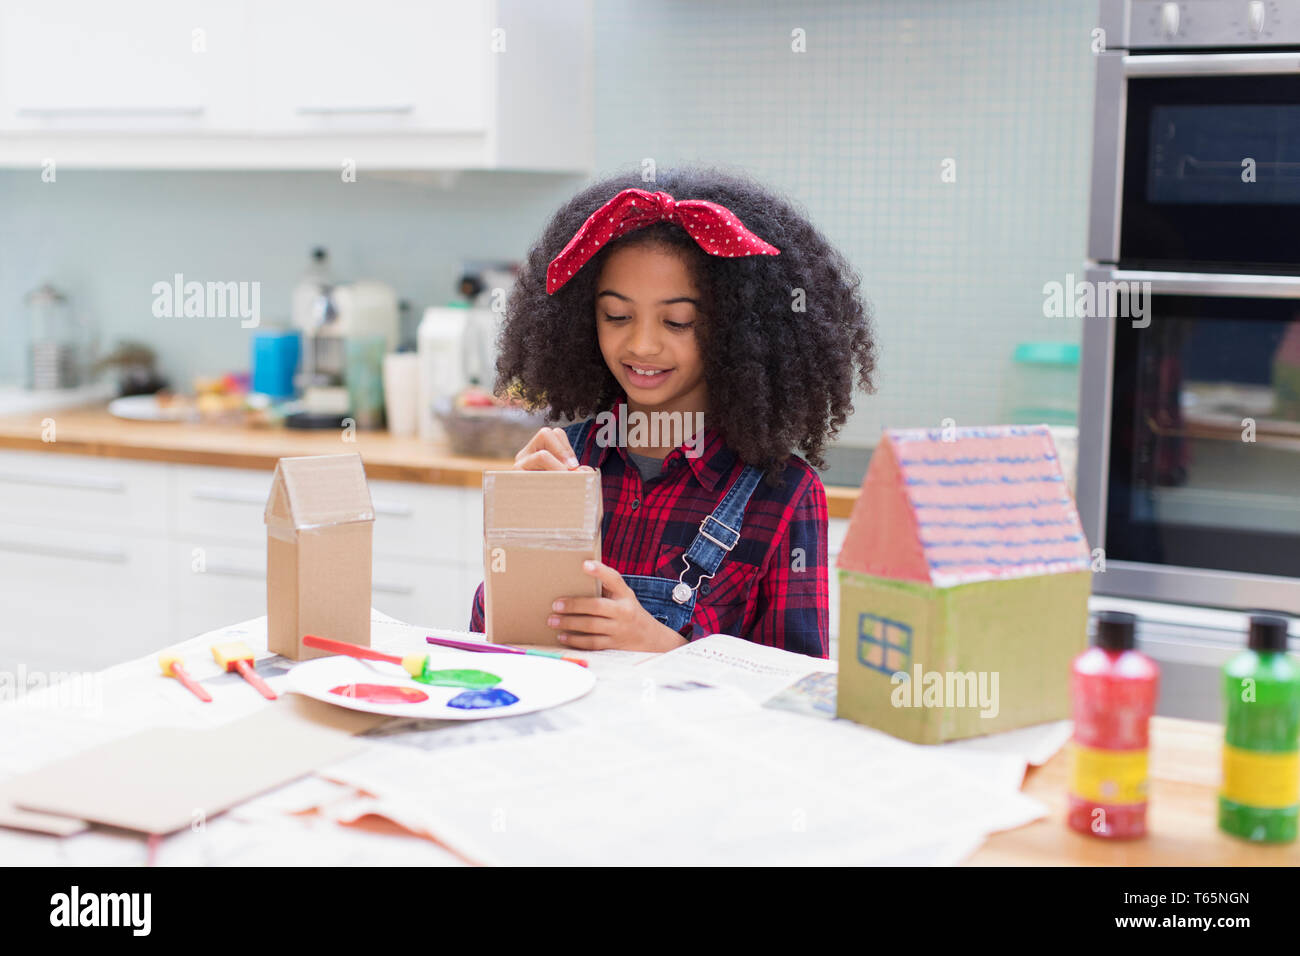 Girl painting house crafts in kitchen Stock Photo